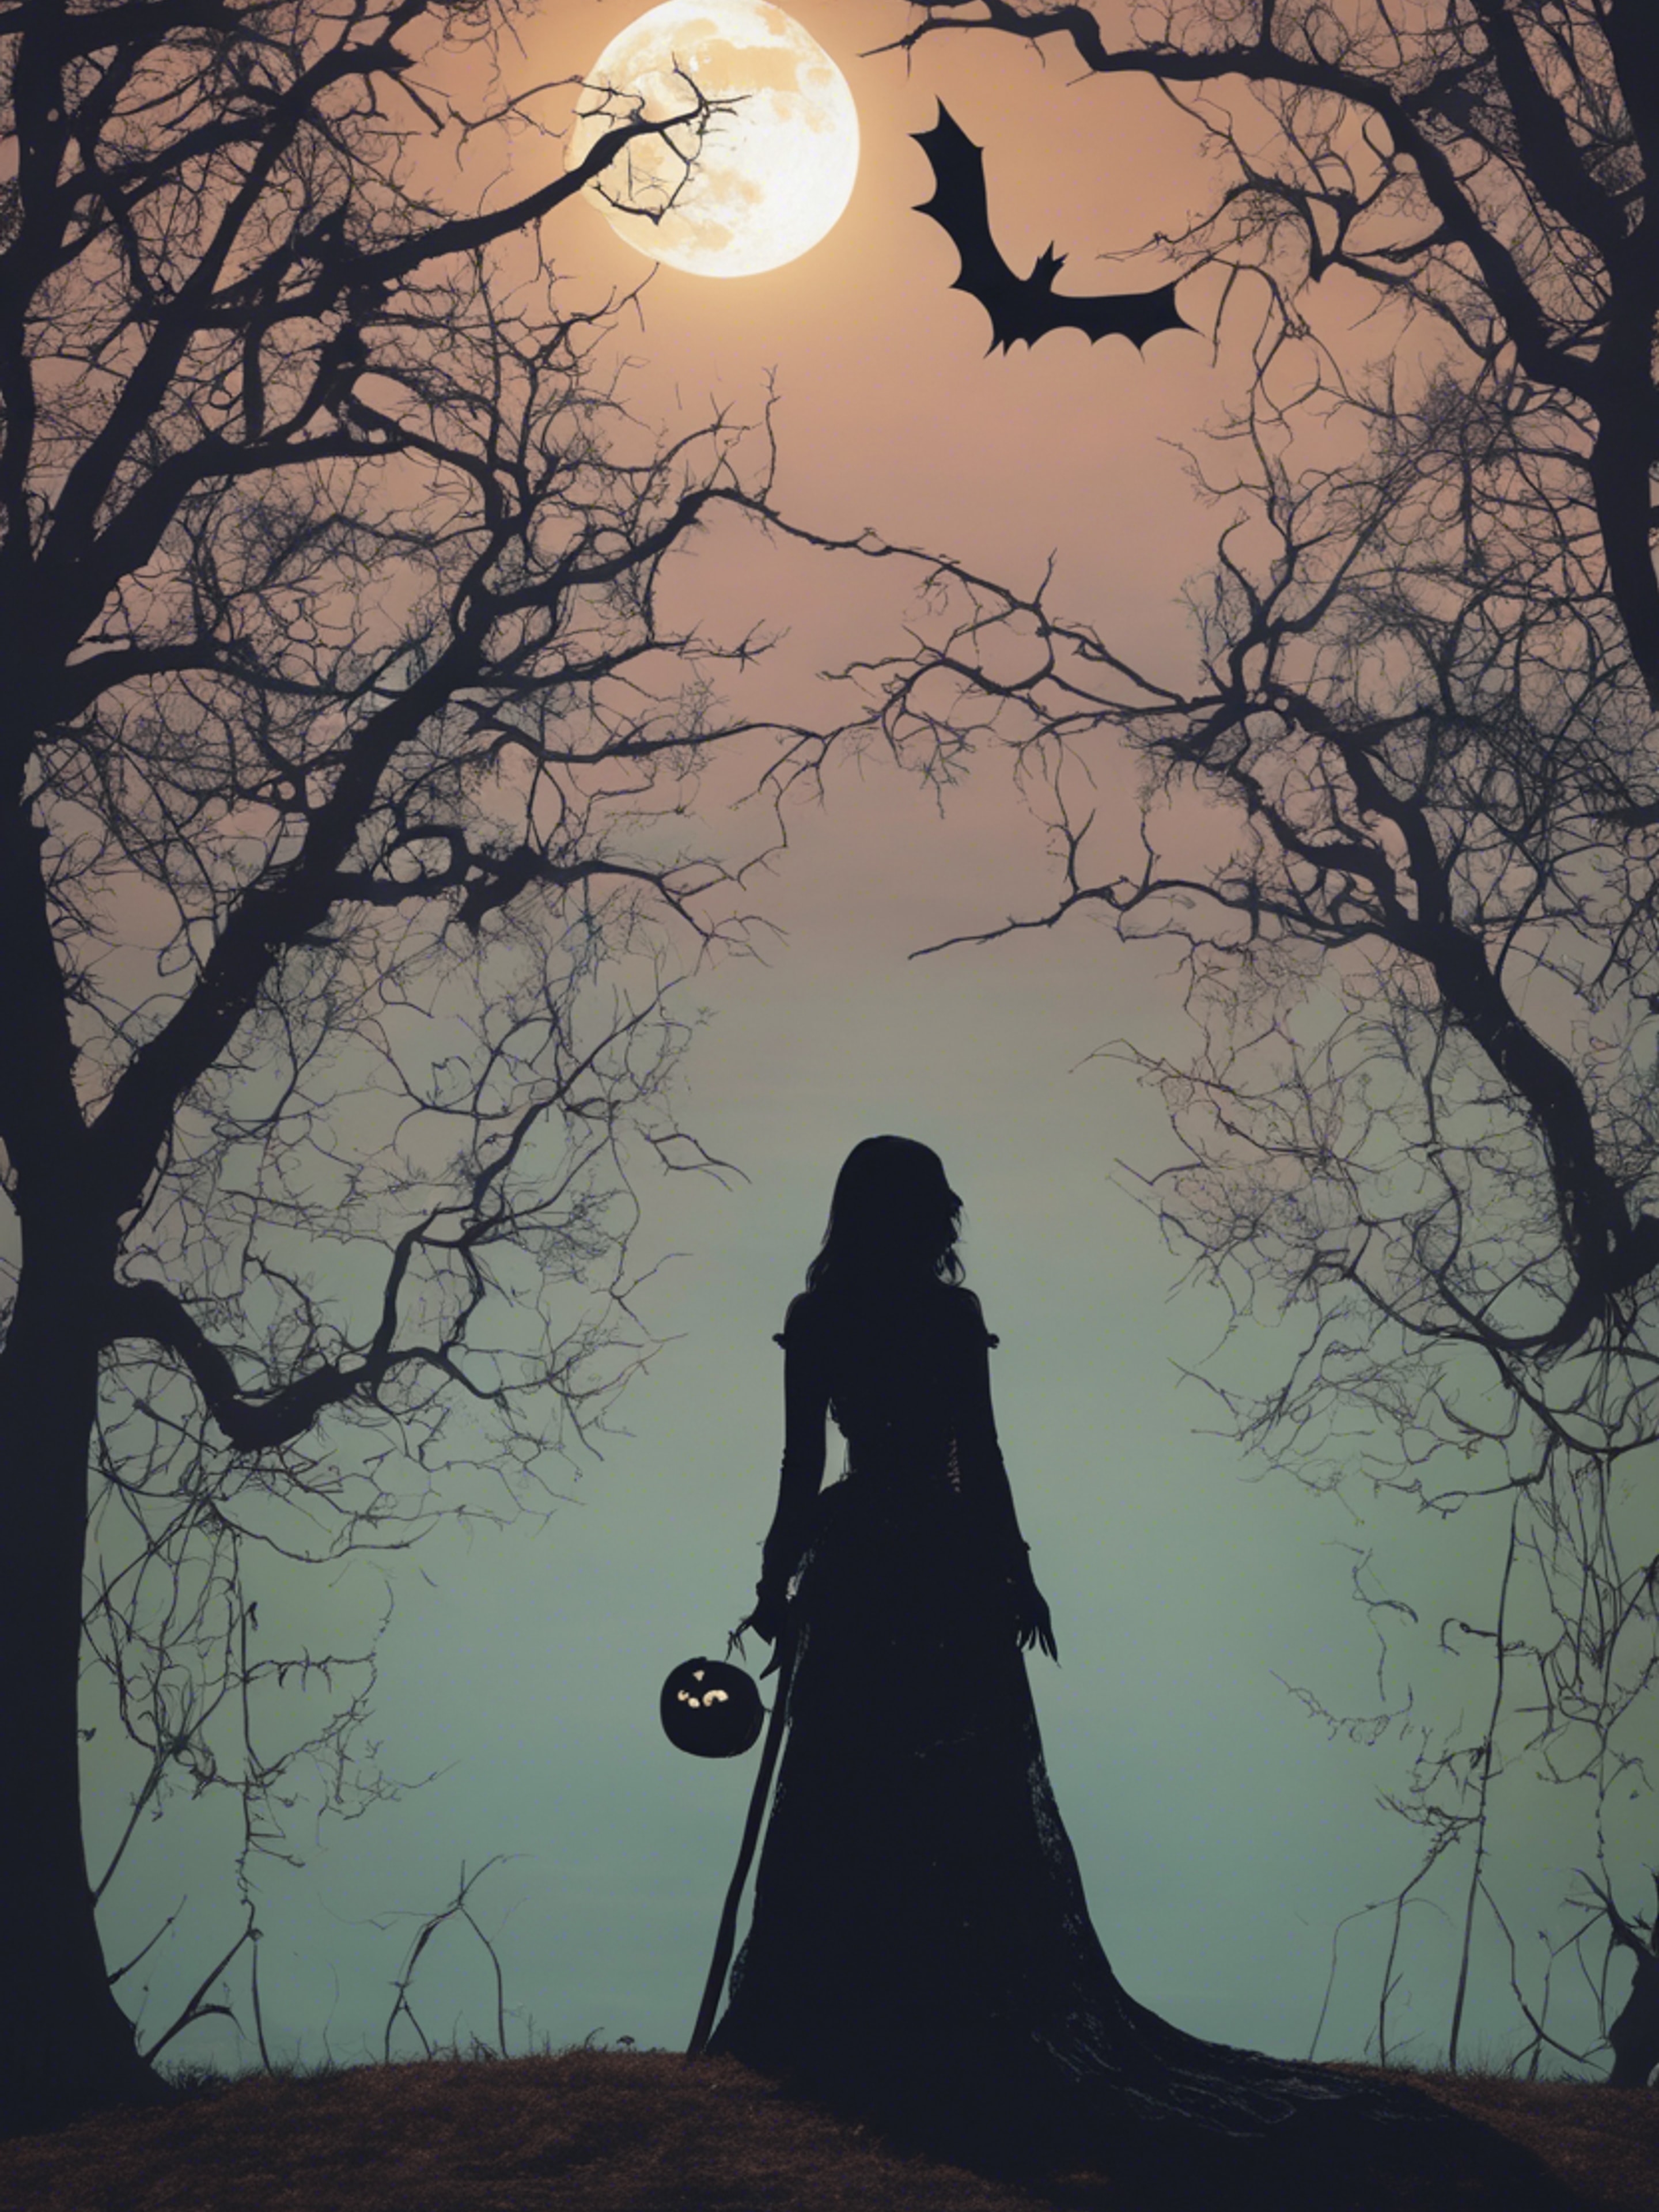 A pastel gothic art piece featuring a halloween-inspired silhouette against a full moon.壁紙[0c56d77b25284c4fbd1c]